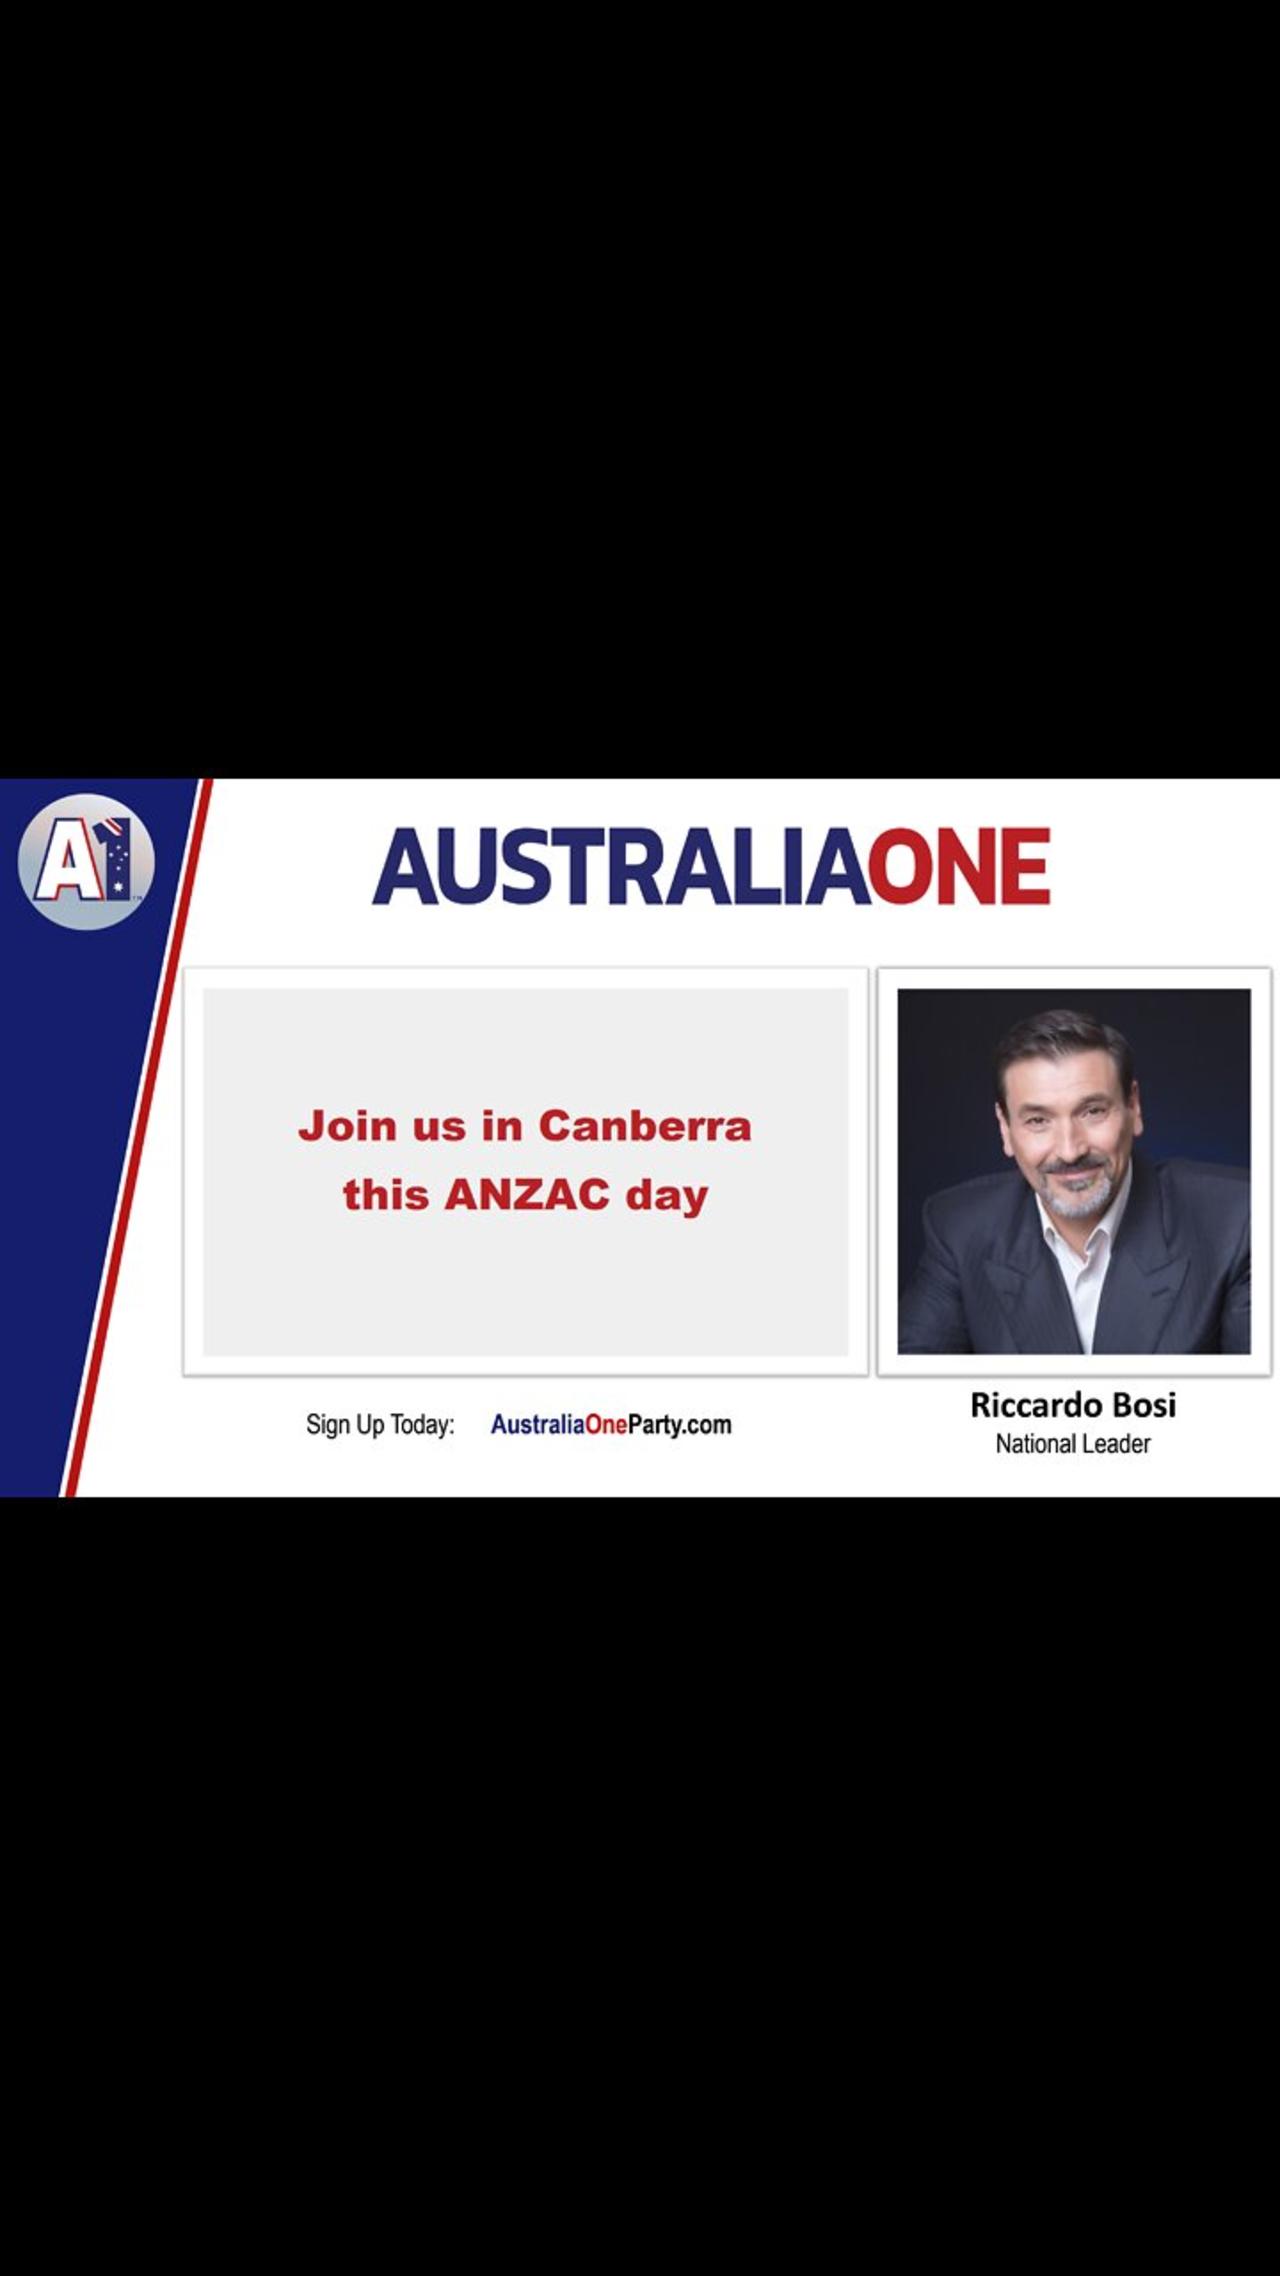 AustraliaOne Party - Join us in Canberra this ANZAC day